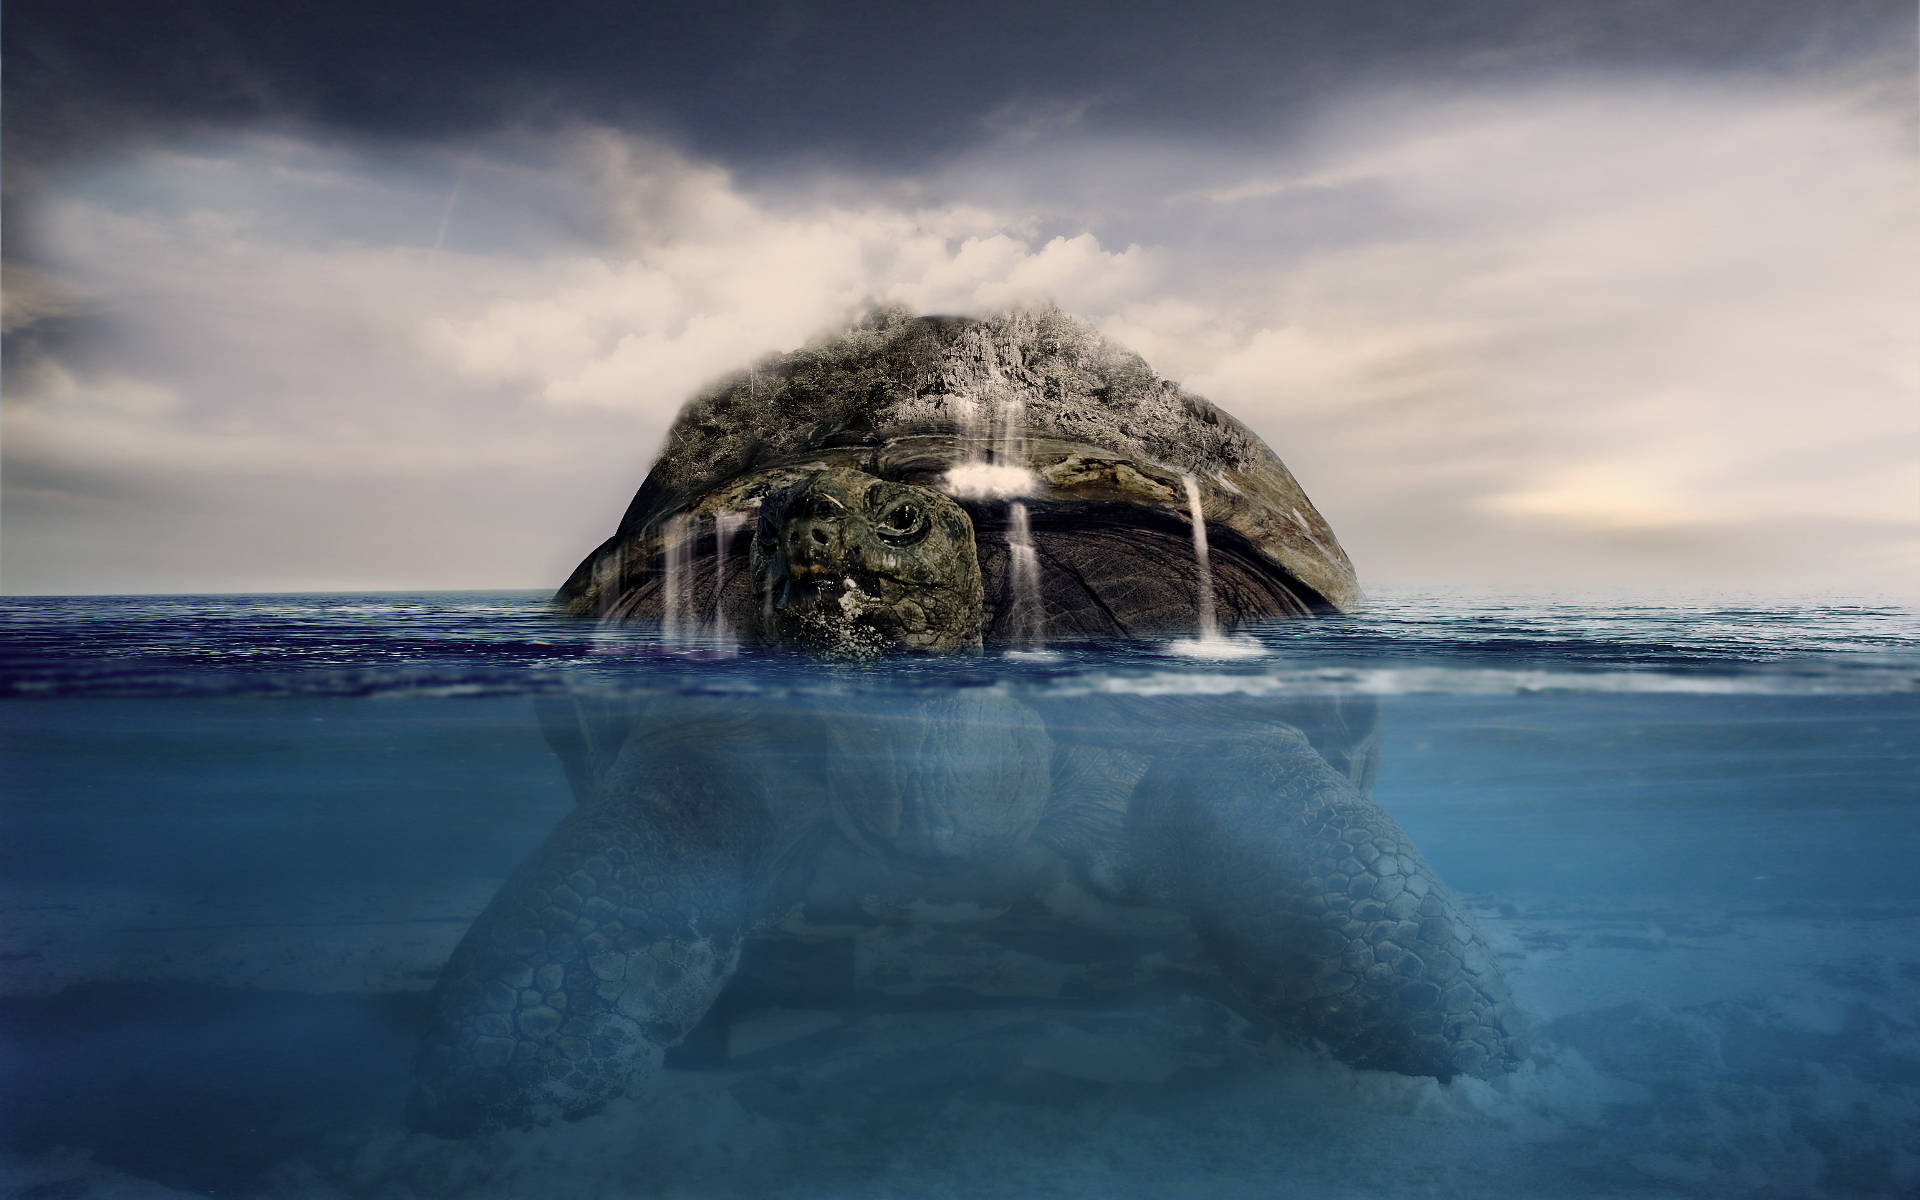 Gigantic Cool Turtle In The Sea